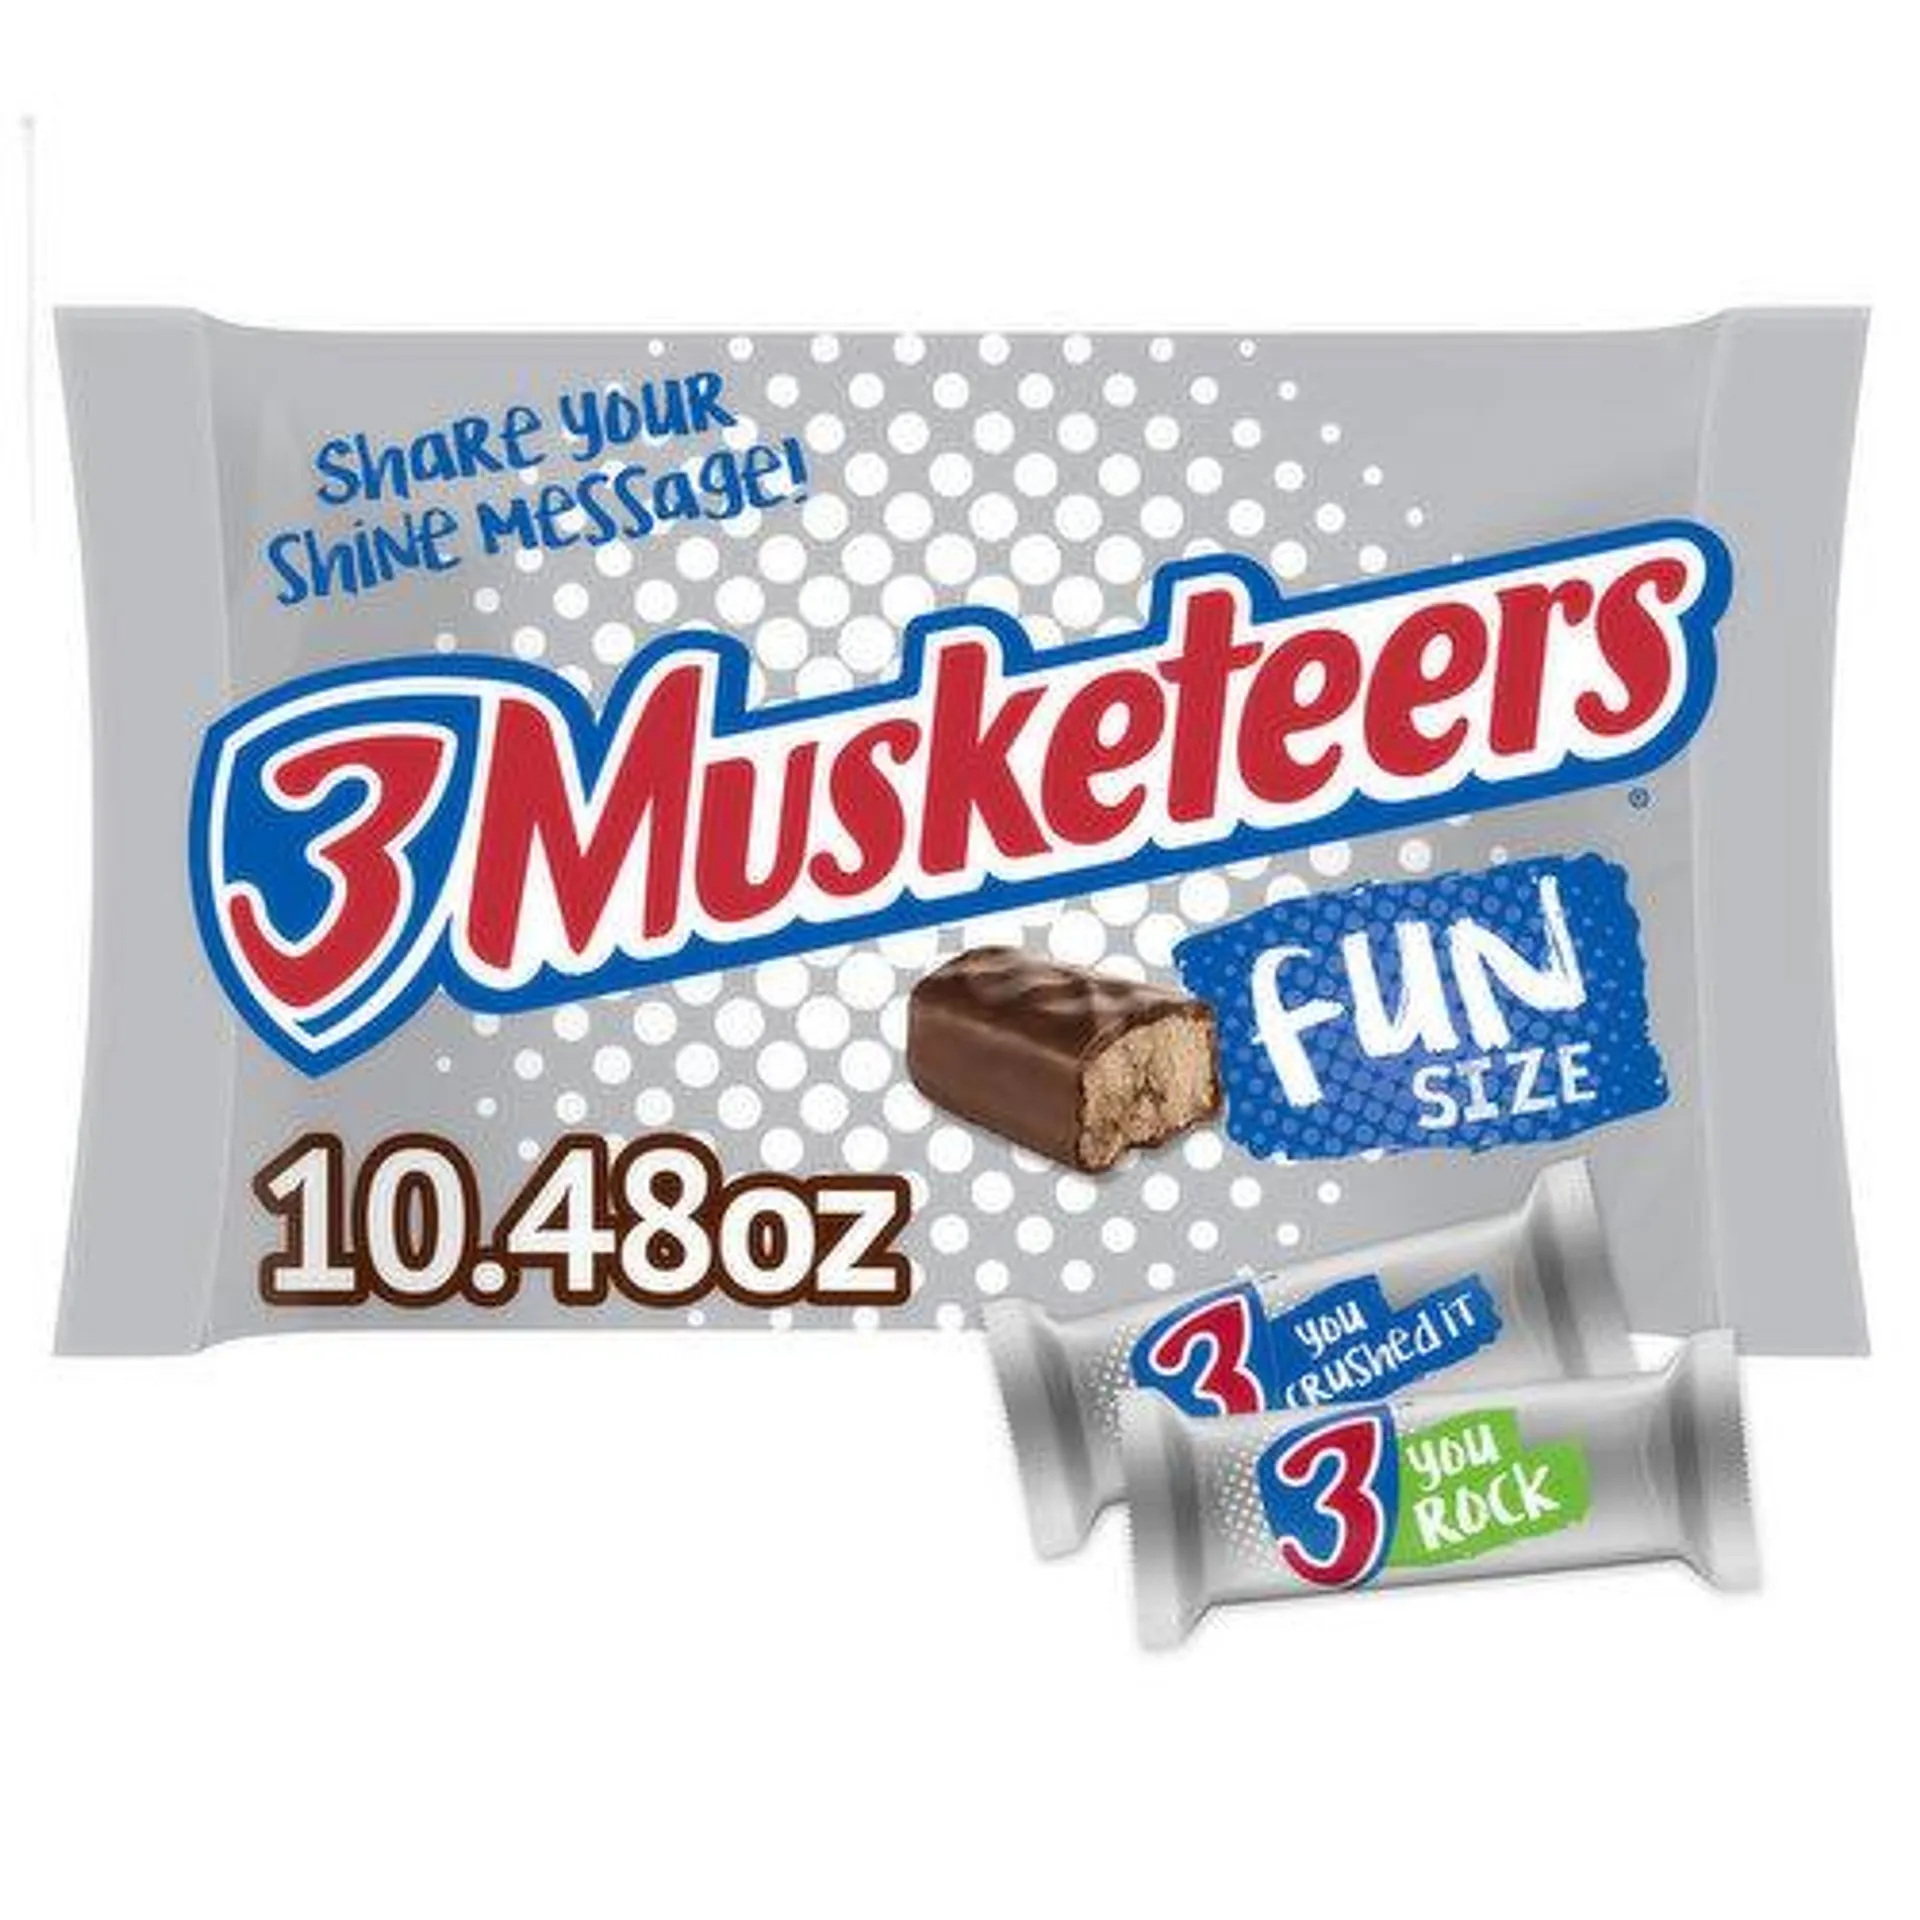 3 Musketeers Candy Bars, Fun Size - 10.48 Each